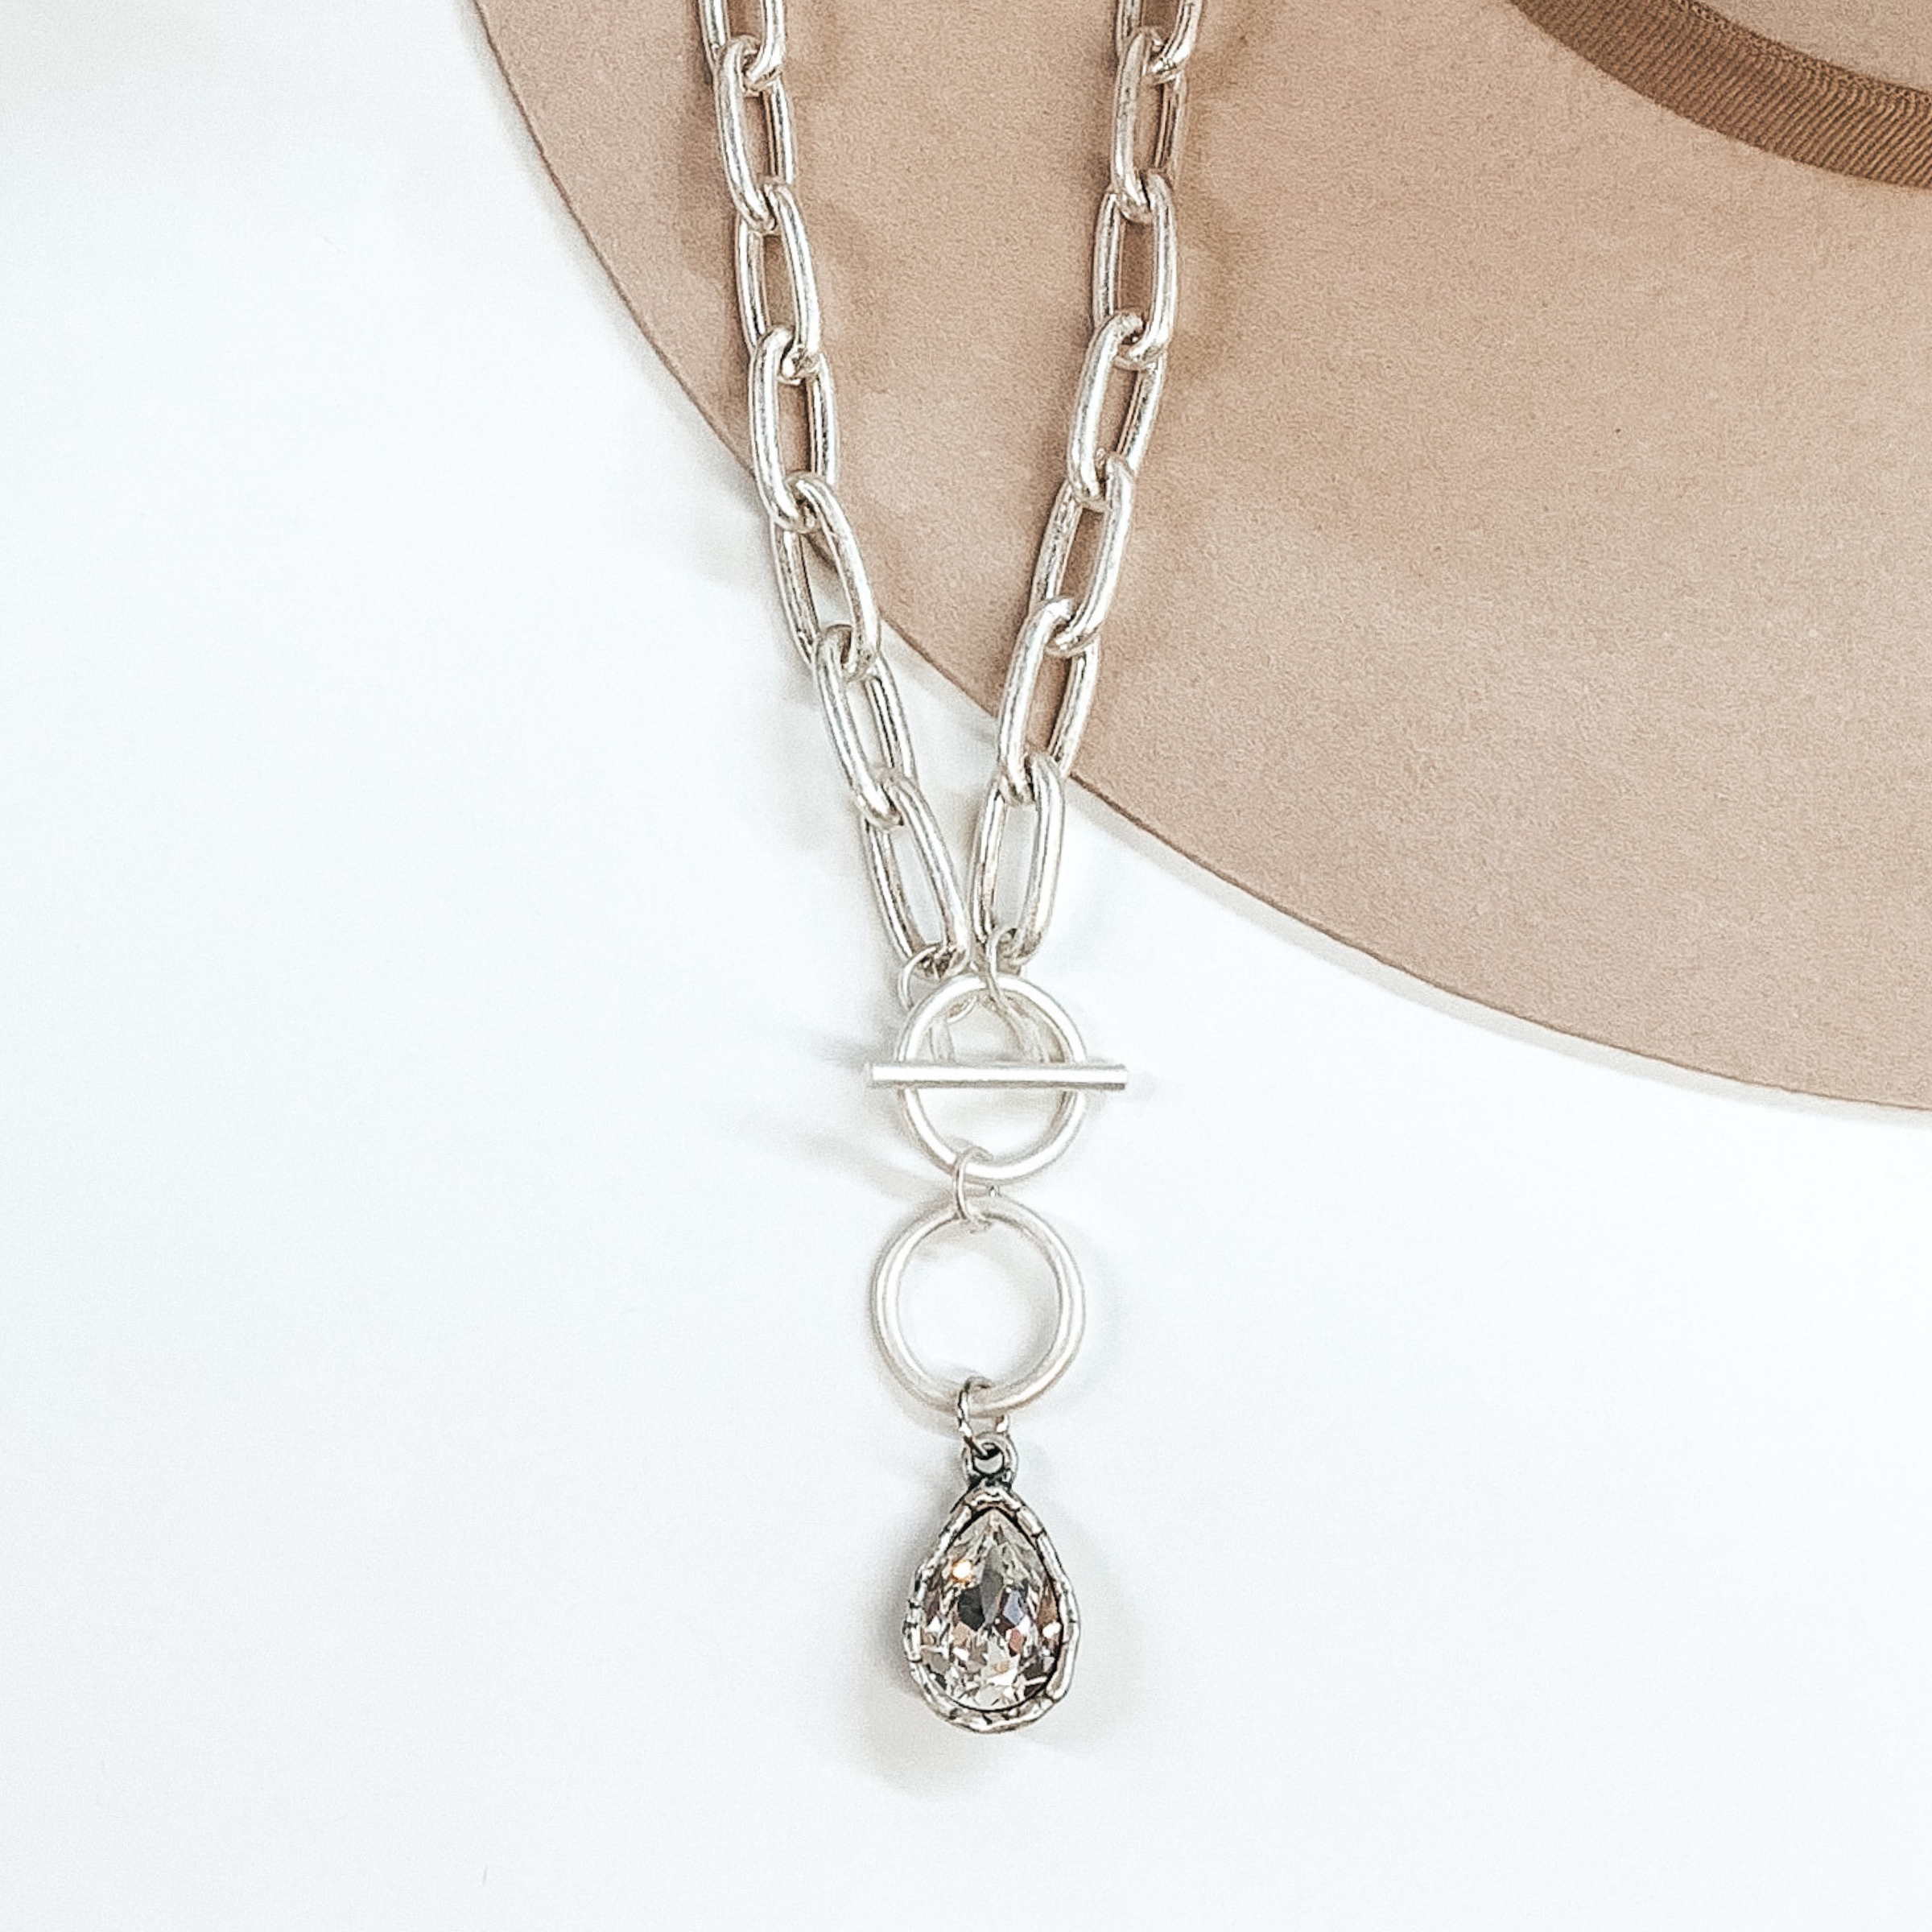 Pink Panache | Thick Chain Necklace in Silver with Clear Pear Teardrop Cushion Cut Crystal - Giddy Up Glamour Boutique